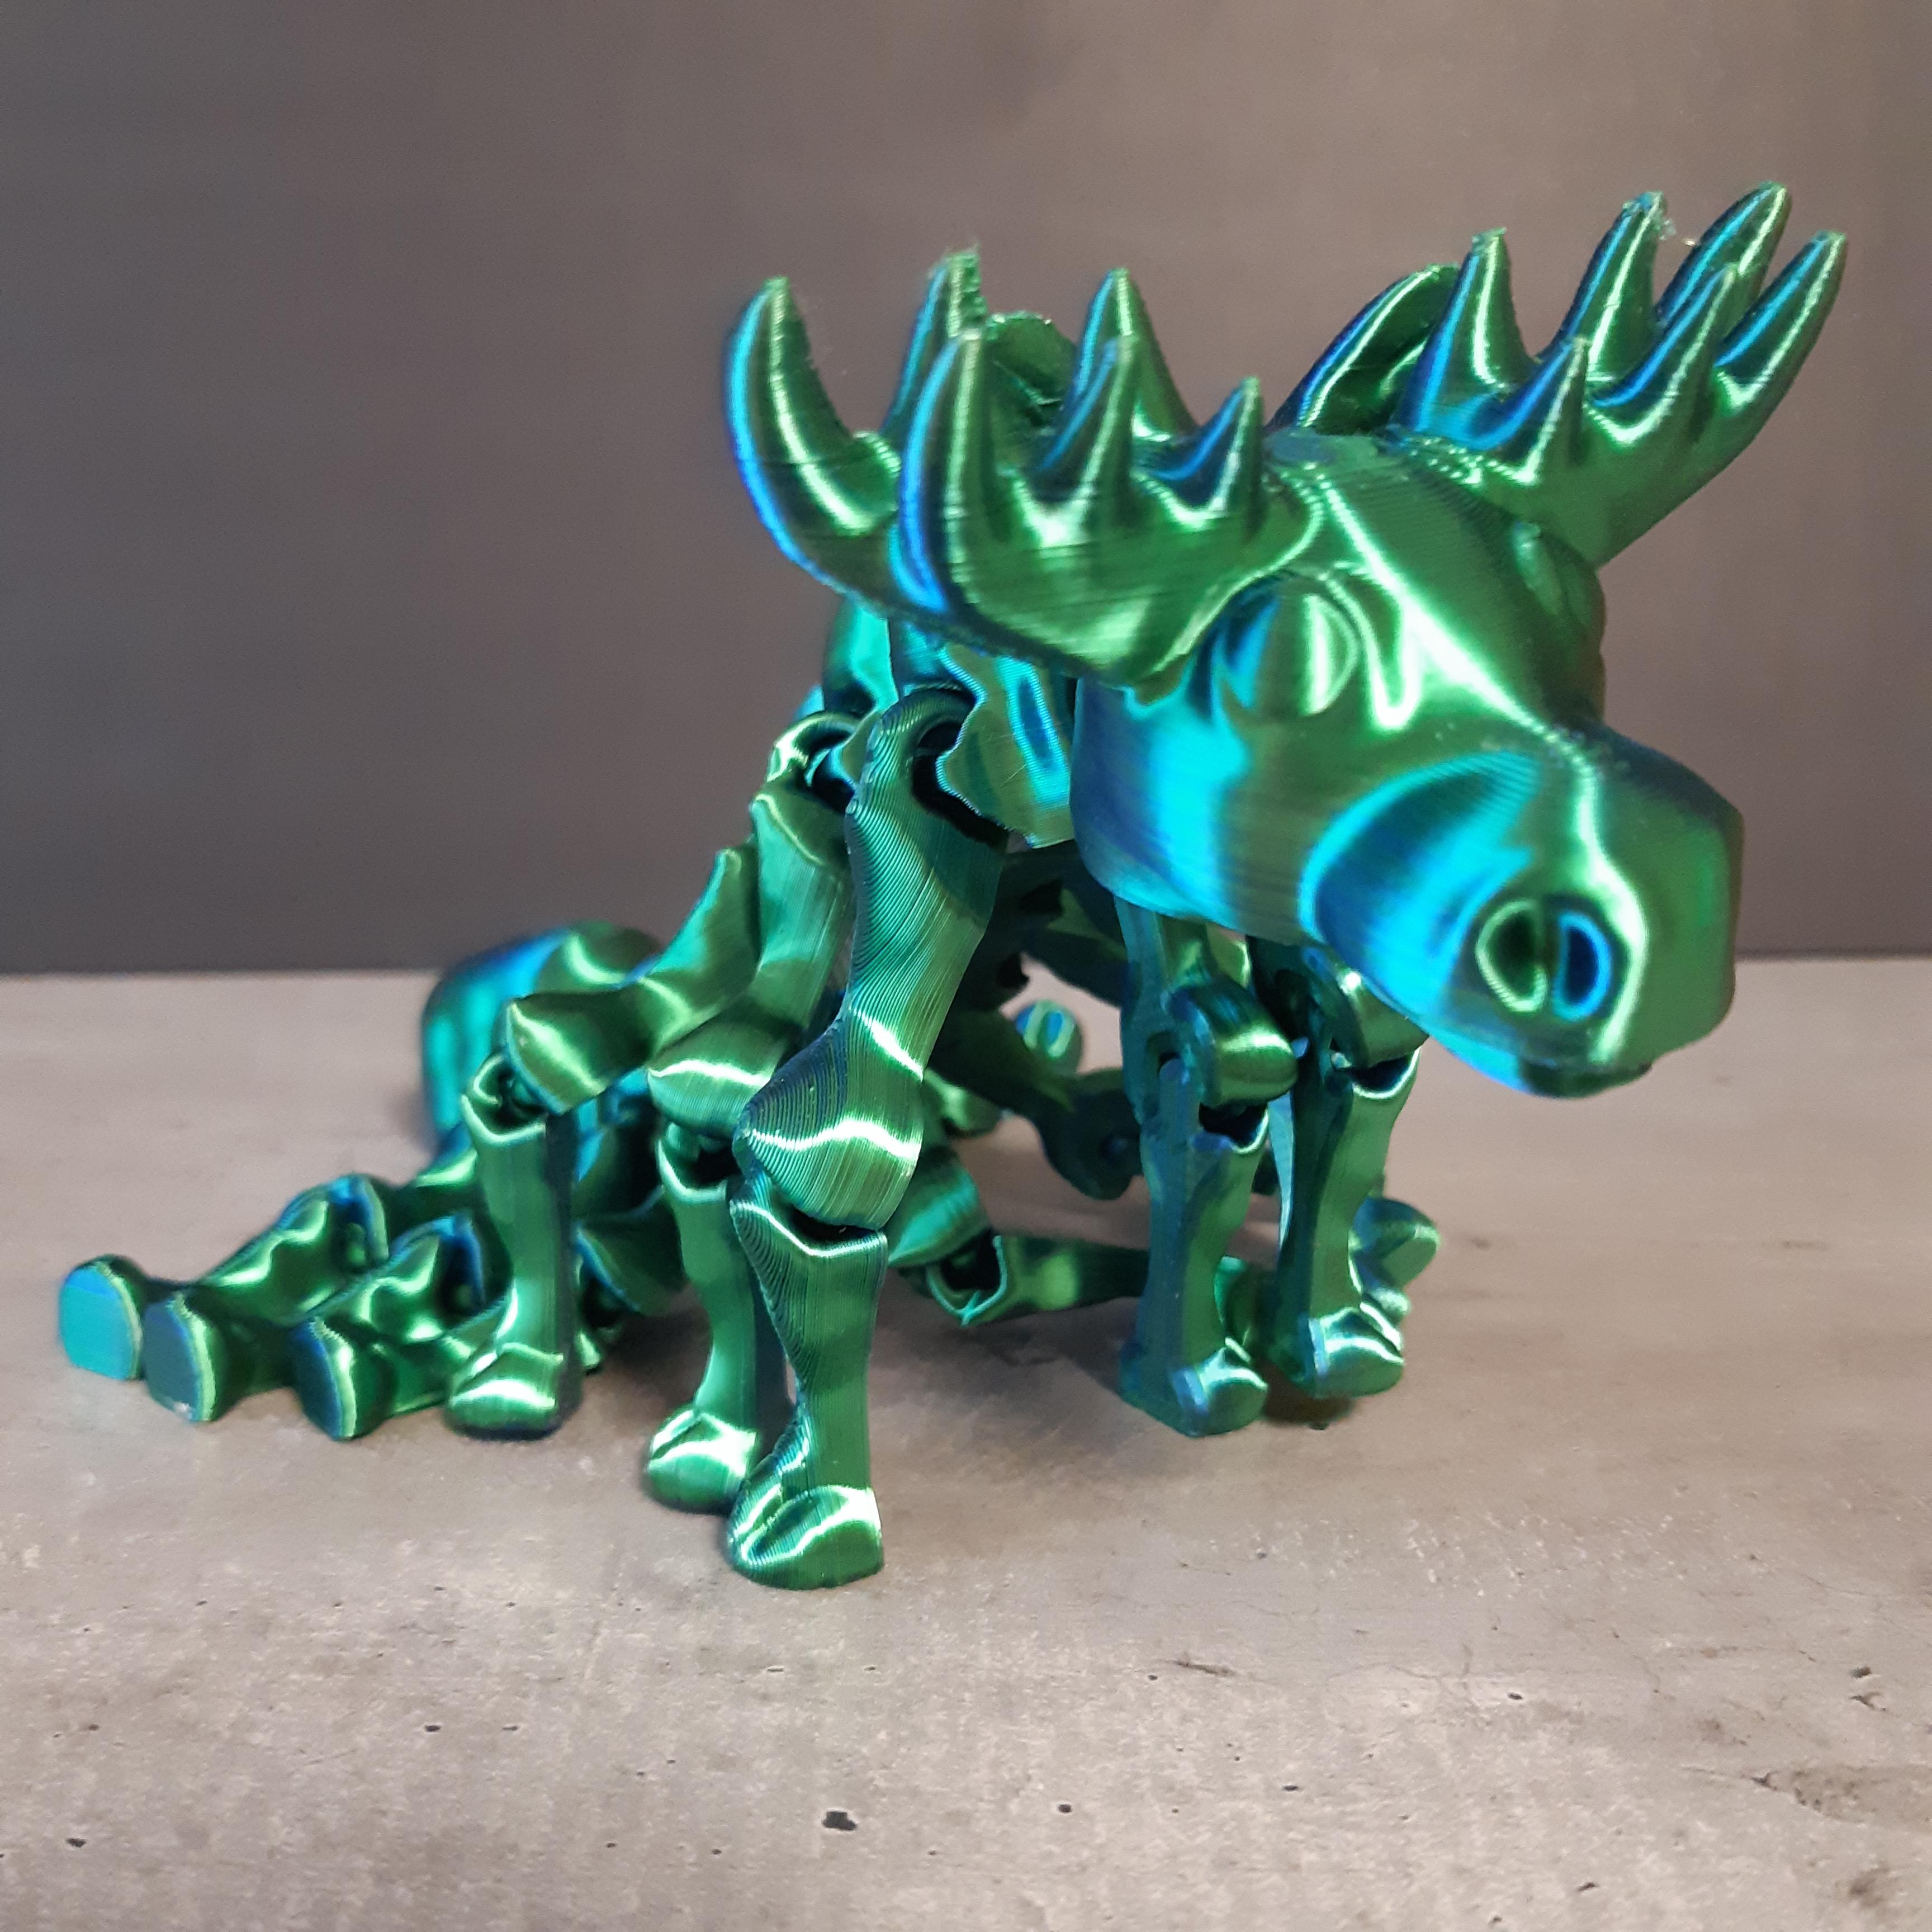 Flexi Moosipede - Moose / Centipede - Articulated Toy - Print in place - Support Free 3d model